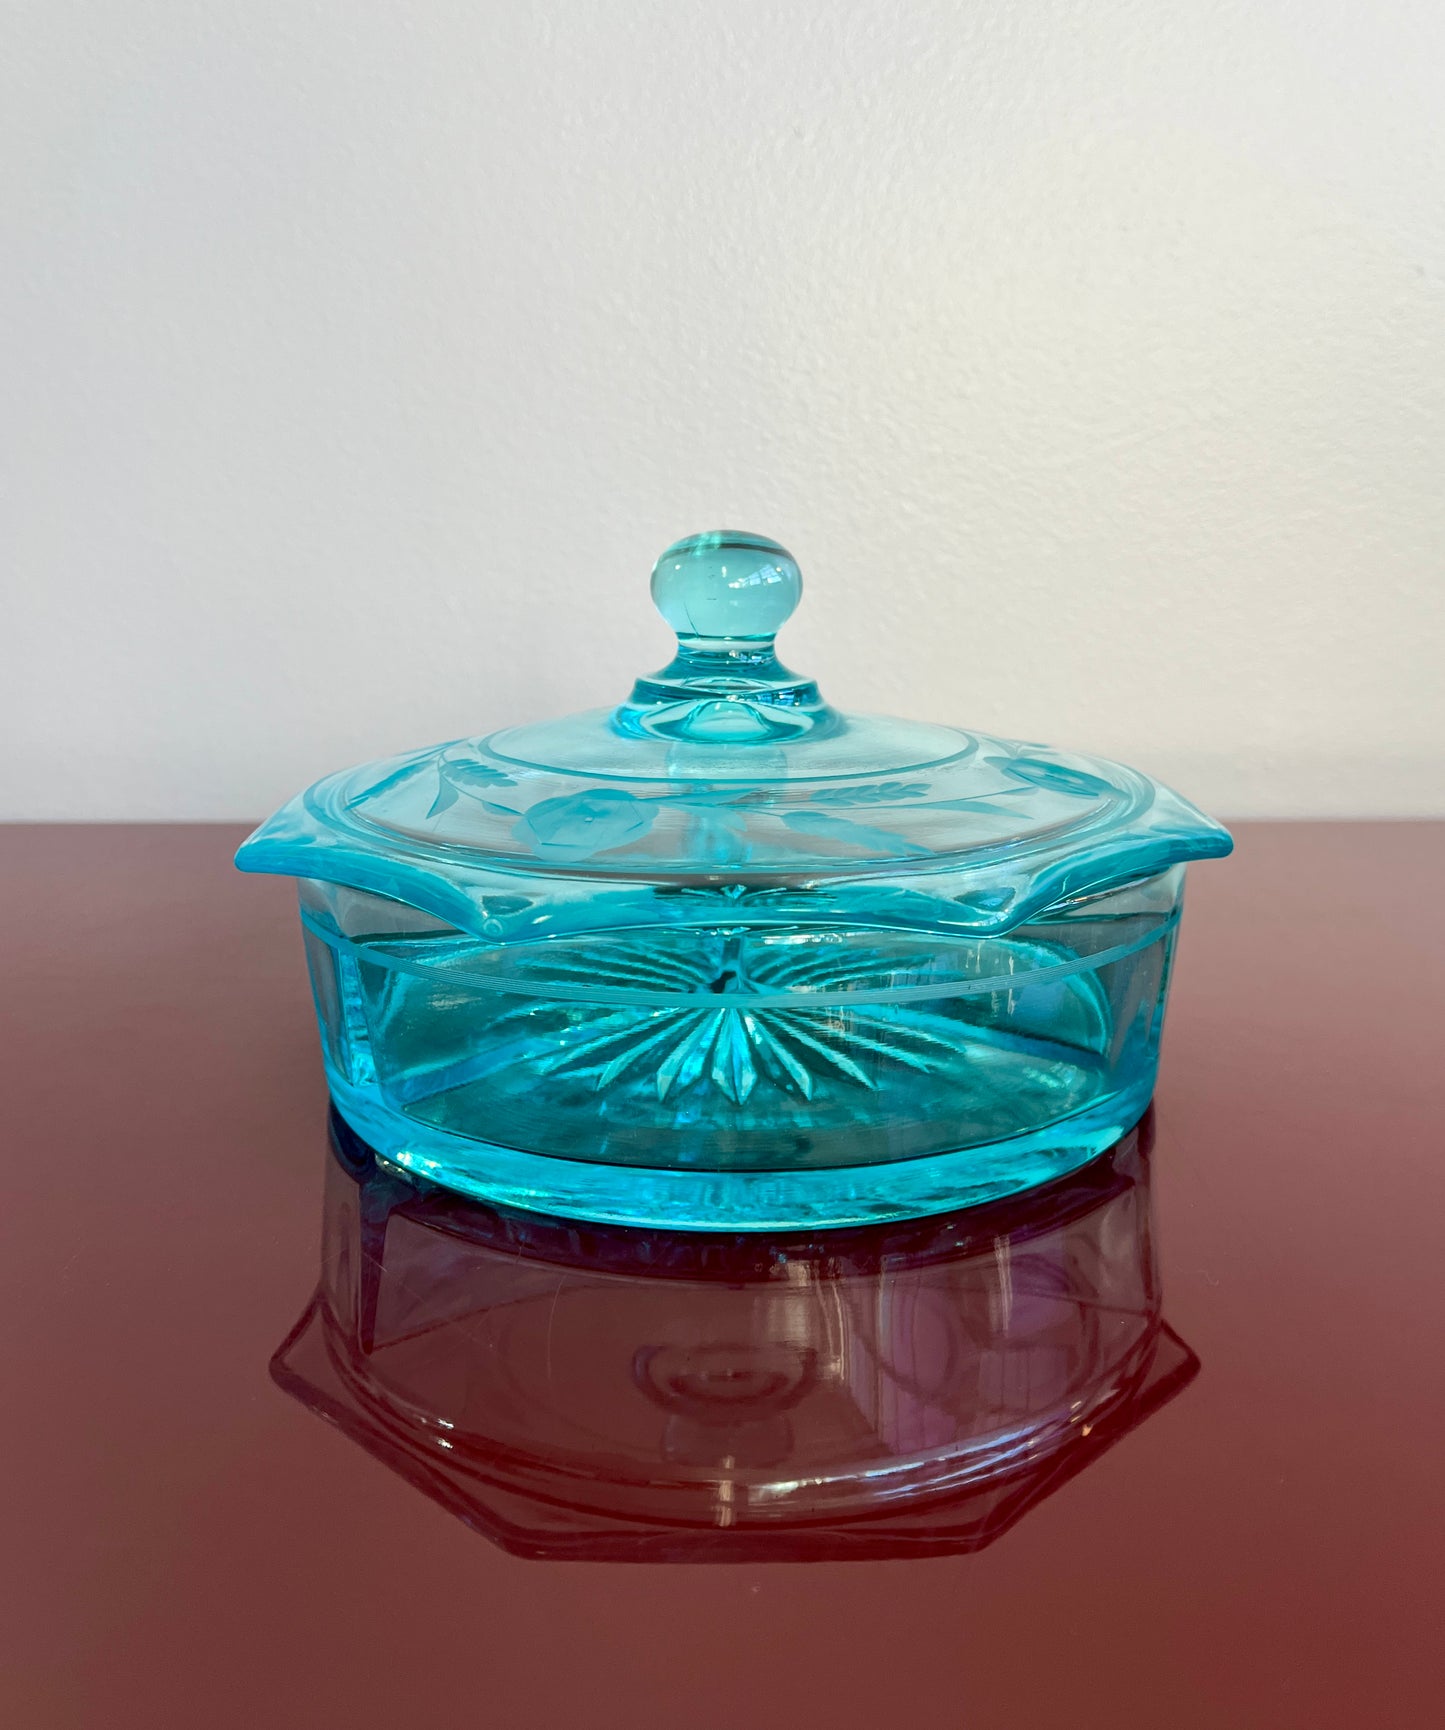 Vintage Ice Blue Segmented Candy Dish